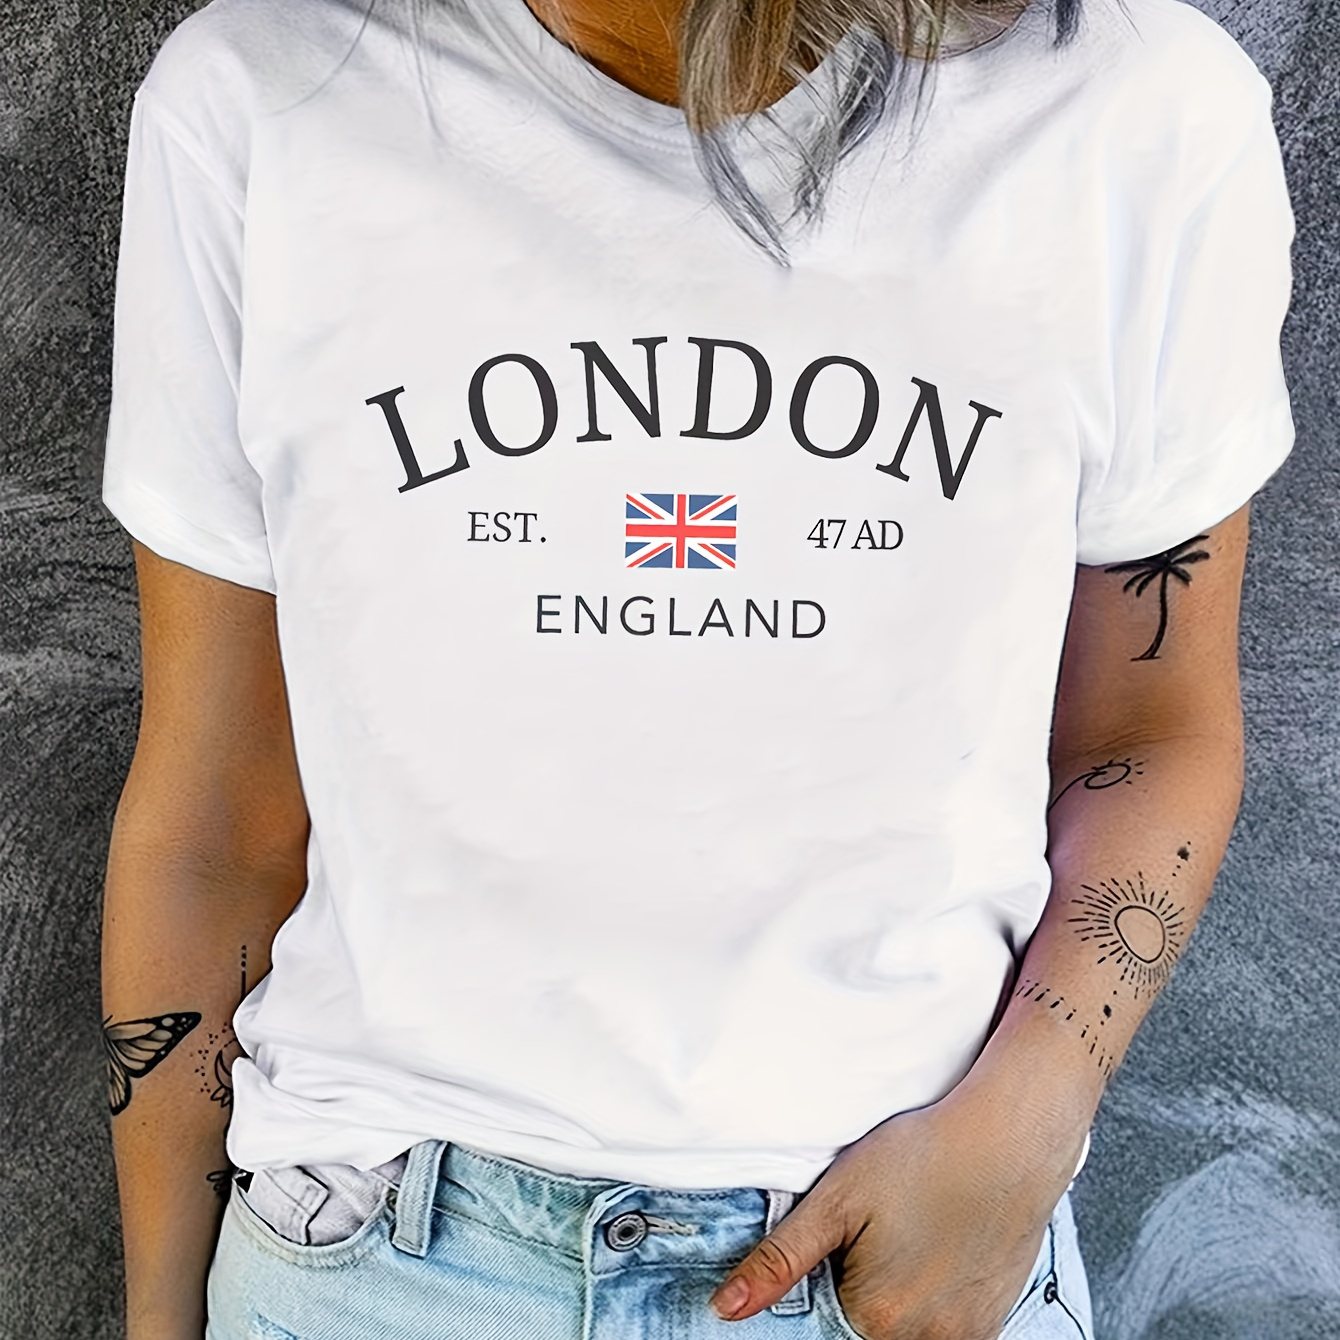 

London Graphic T-shirt, Casual Short Sleeves Tee With Uk Flag Fashion Streetwear For Women